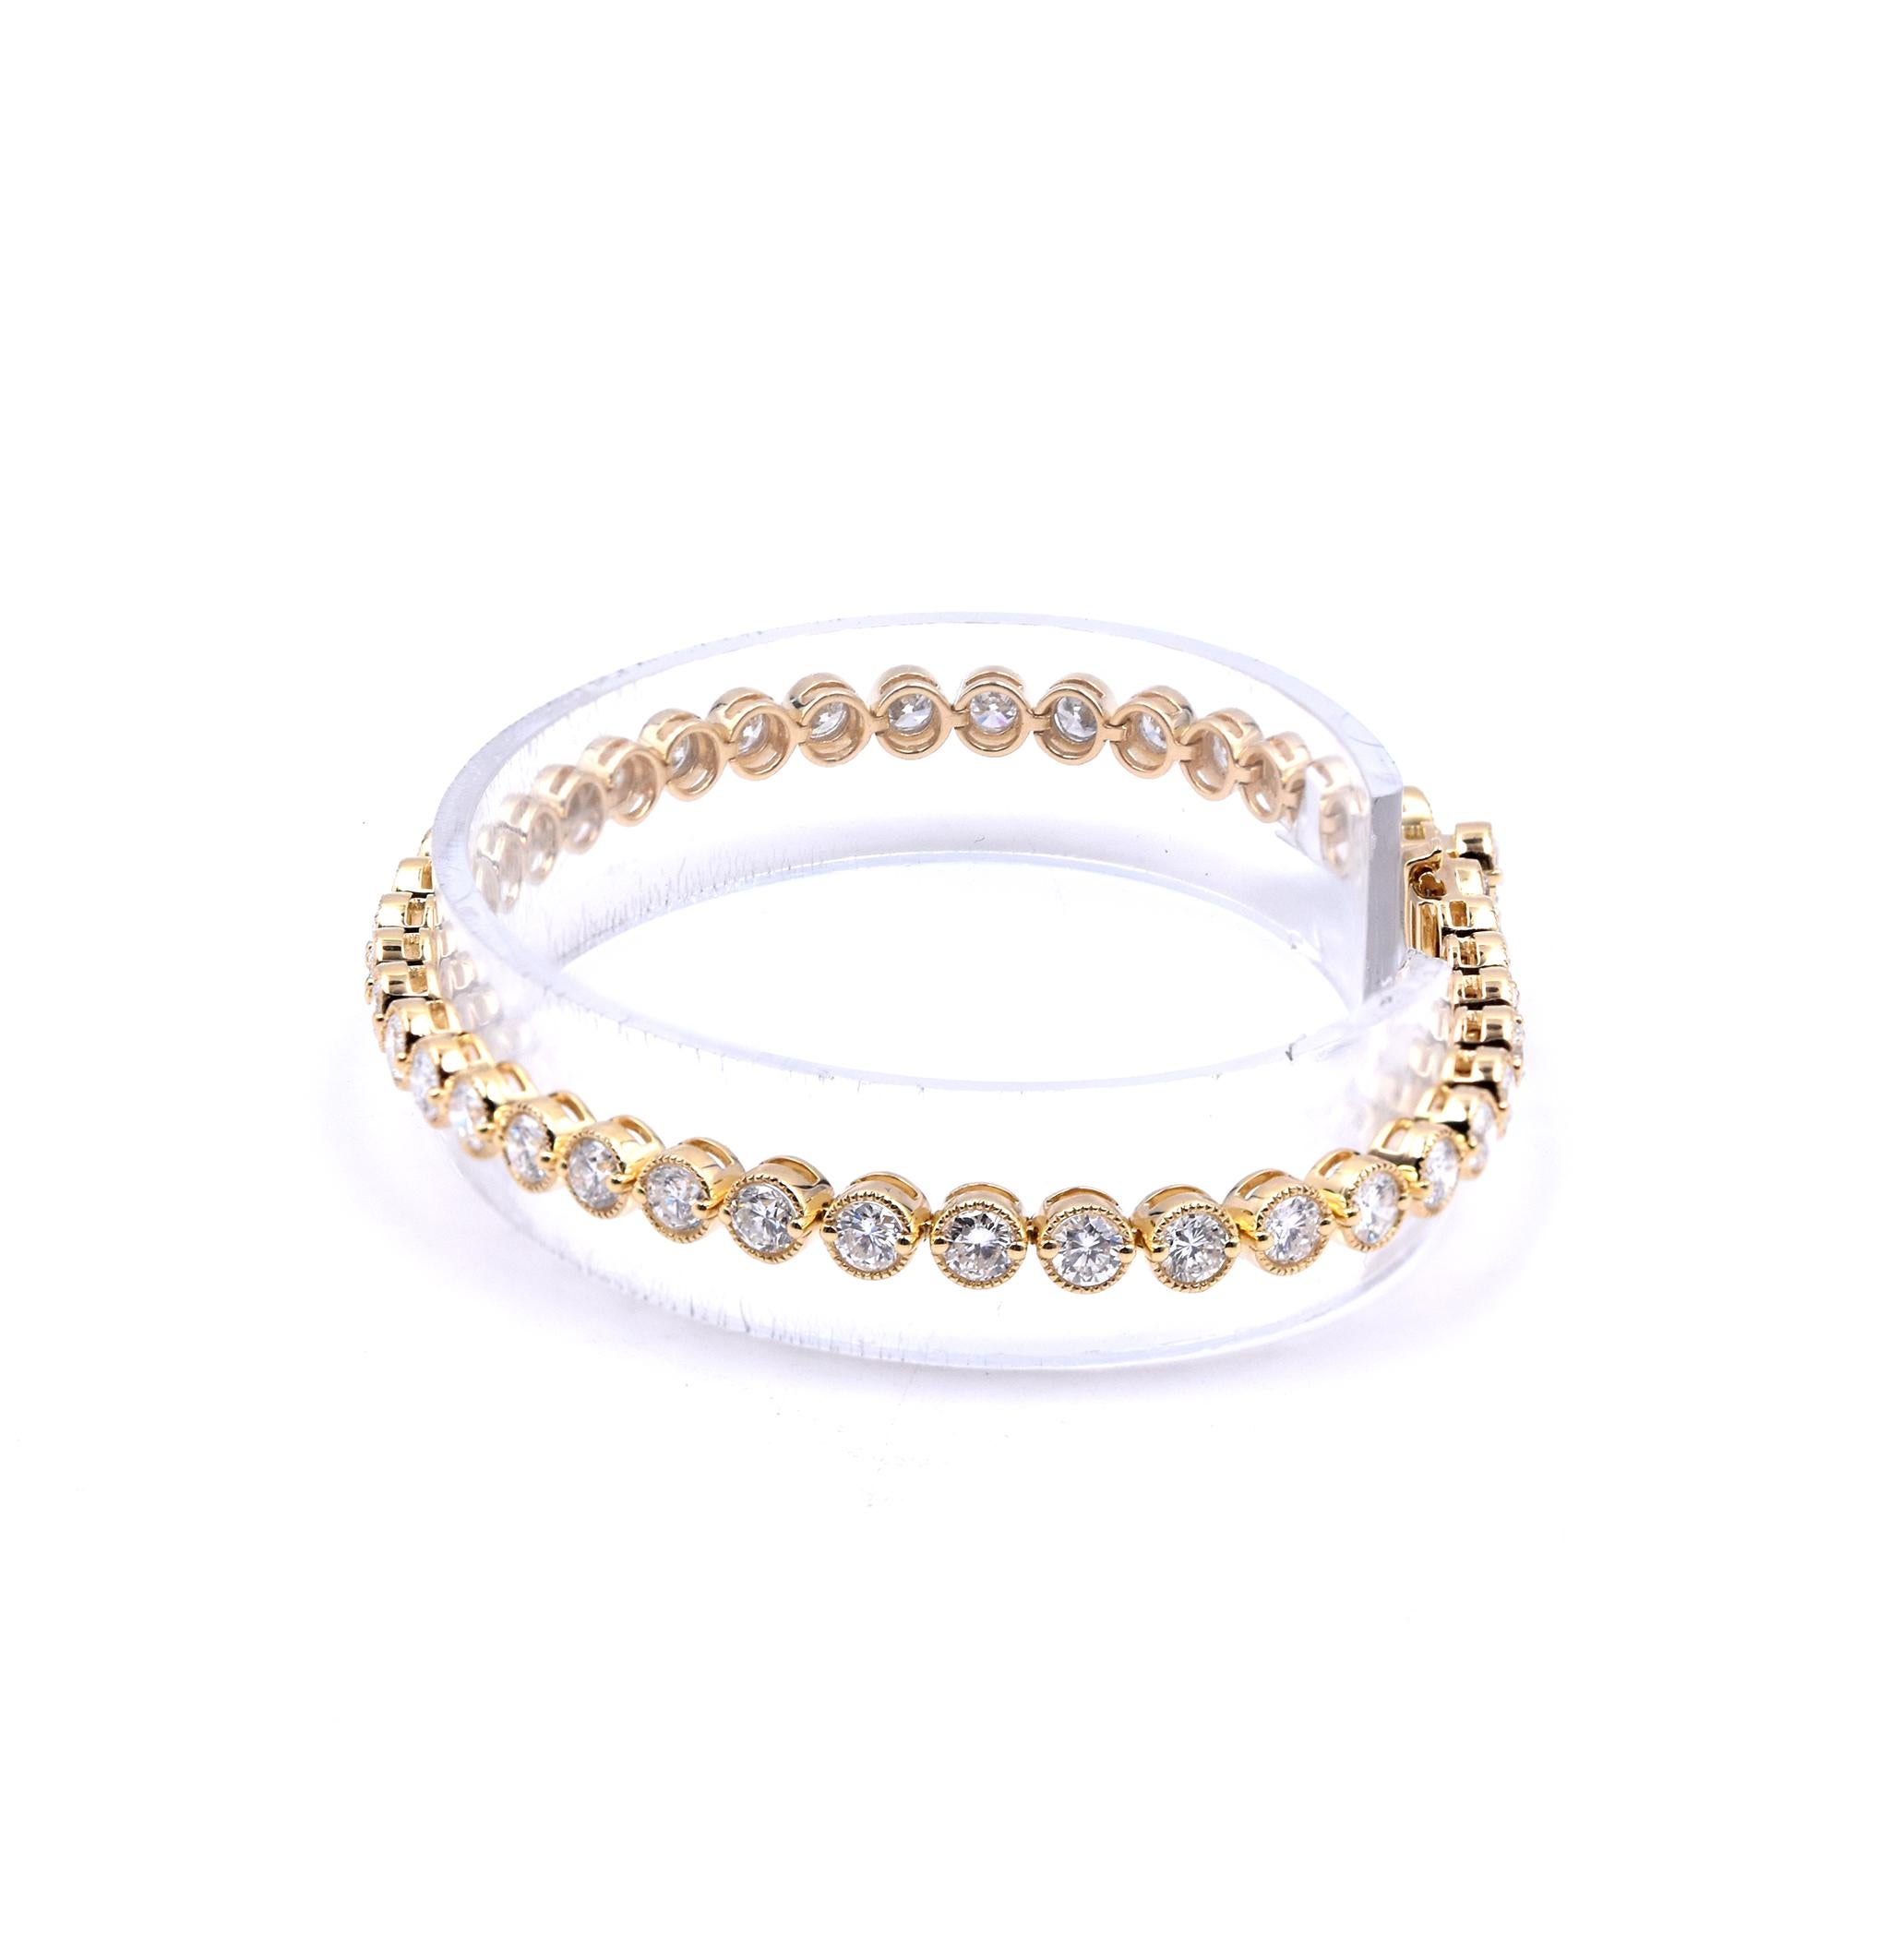 Designer: custom
Material: 18K yellow gold
Diamonds: 41 round brilliant cut = 5.00cttw
Color: H
Clarity: SI1
Dimensions: bracelet will fit up to a 7-inch wrist
Weight: 12.96 grams
